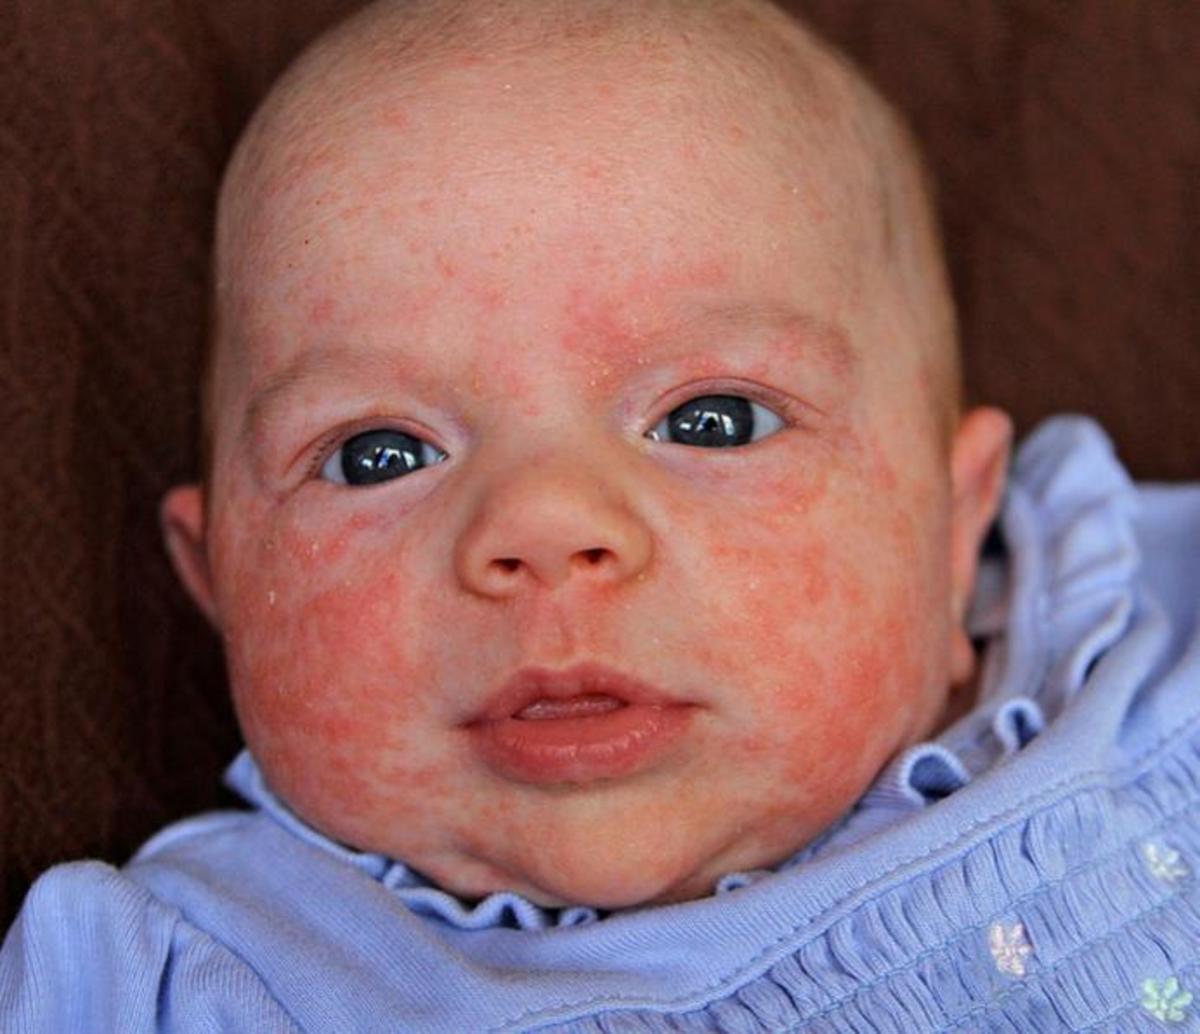 Eczema in Babies and Toddlers